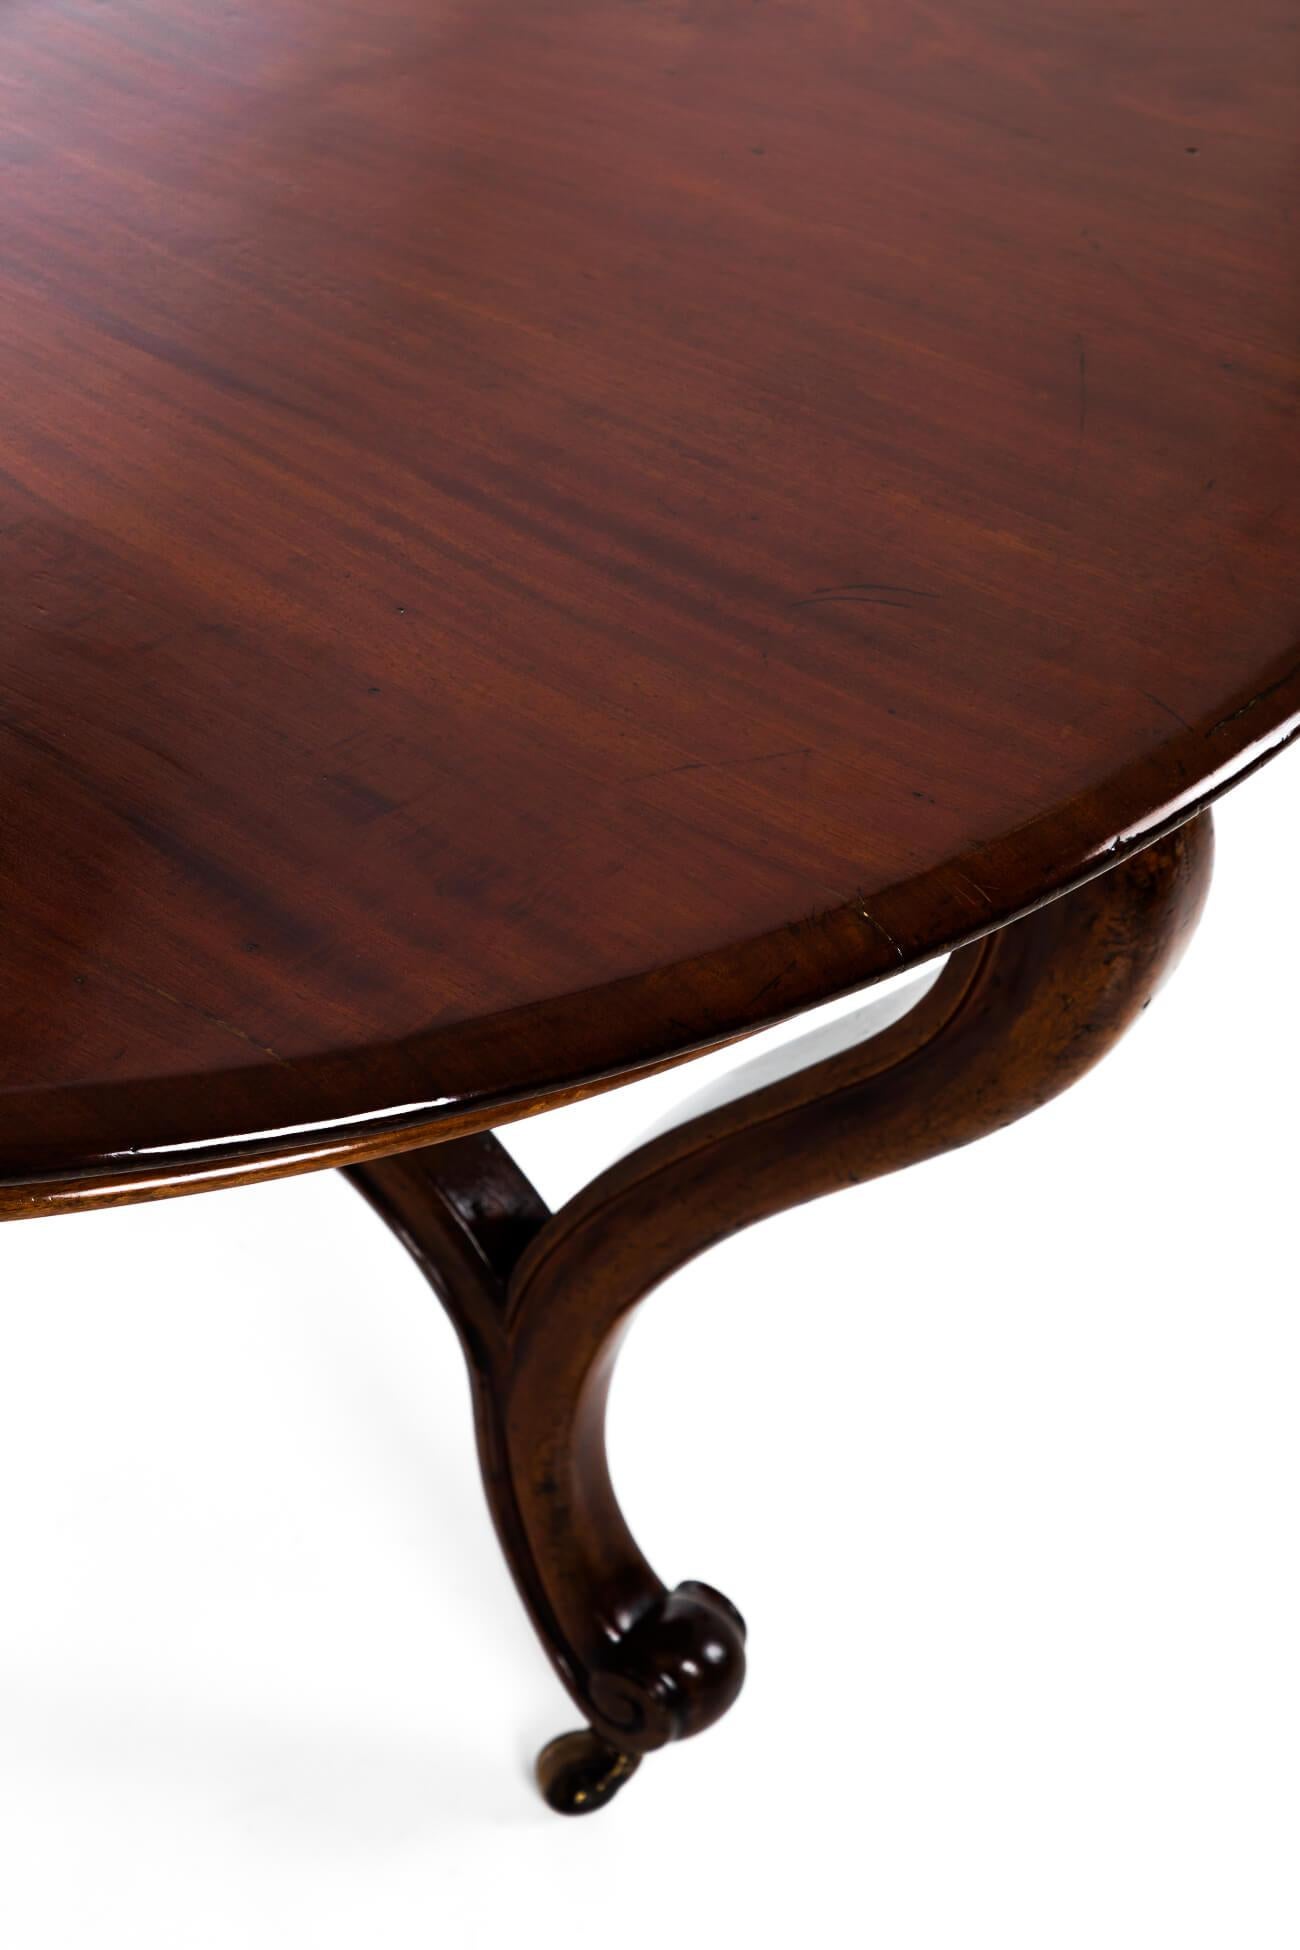 French Provincial Mid-19th Century Fruitwood Centre Table, circa 1850 For Sale